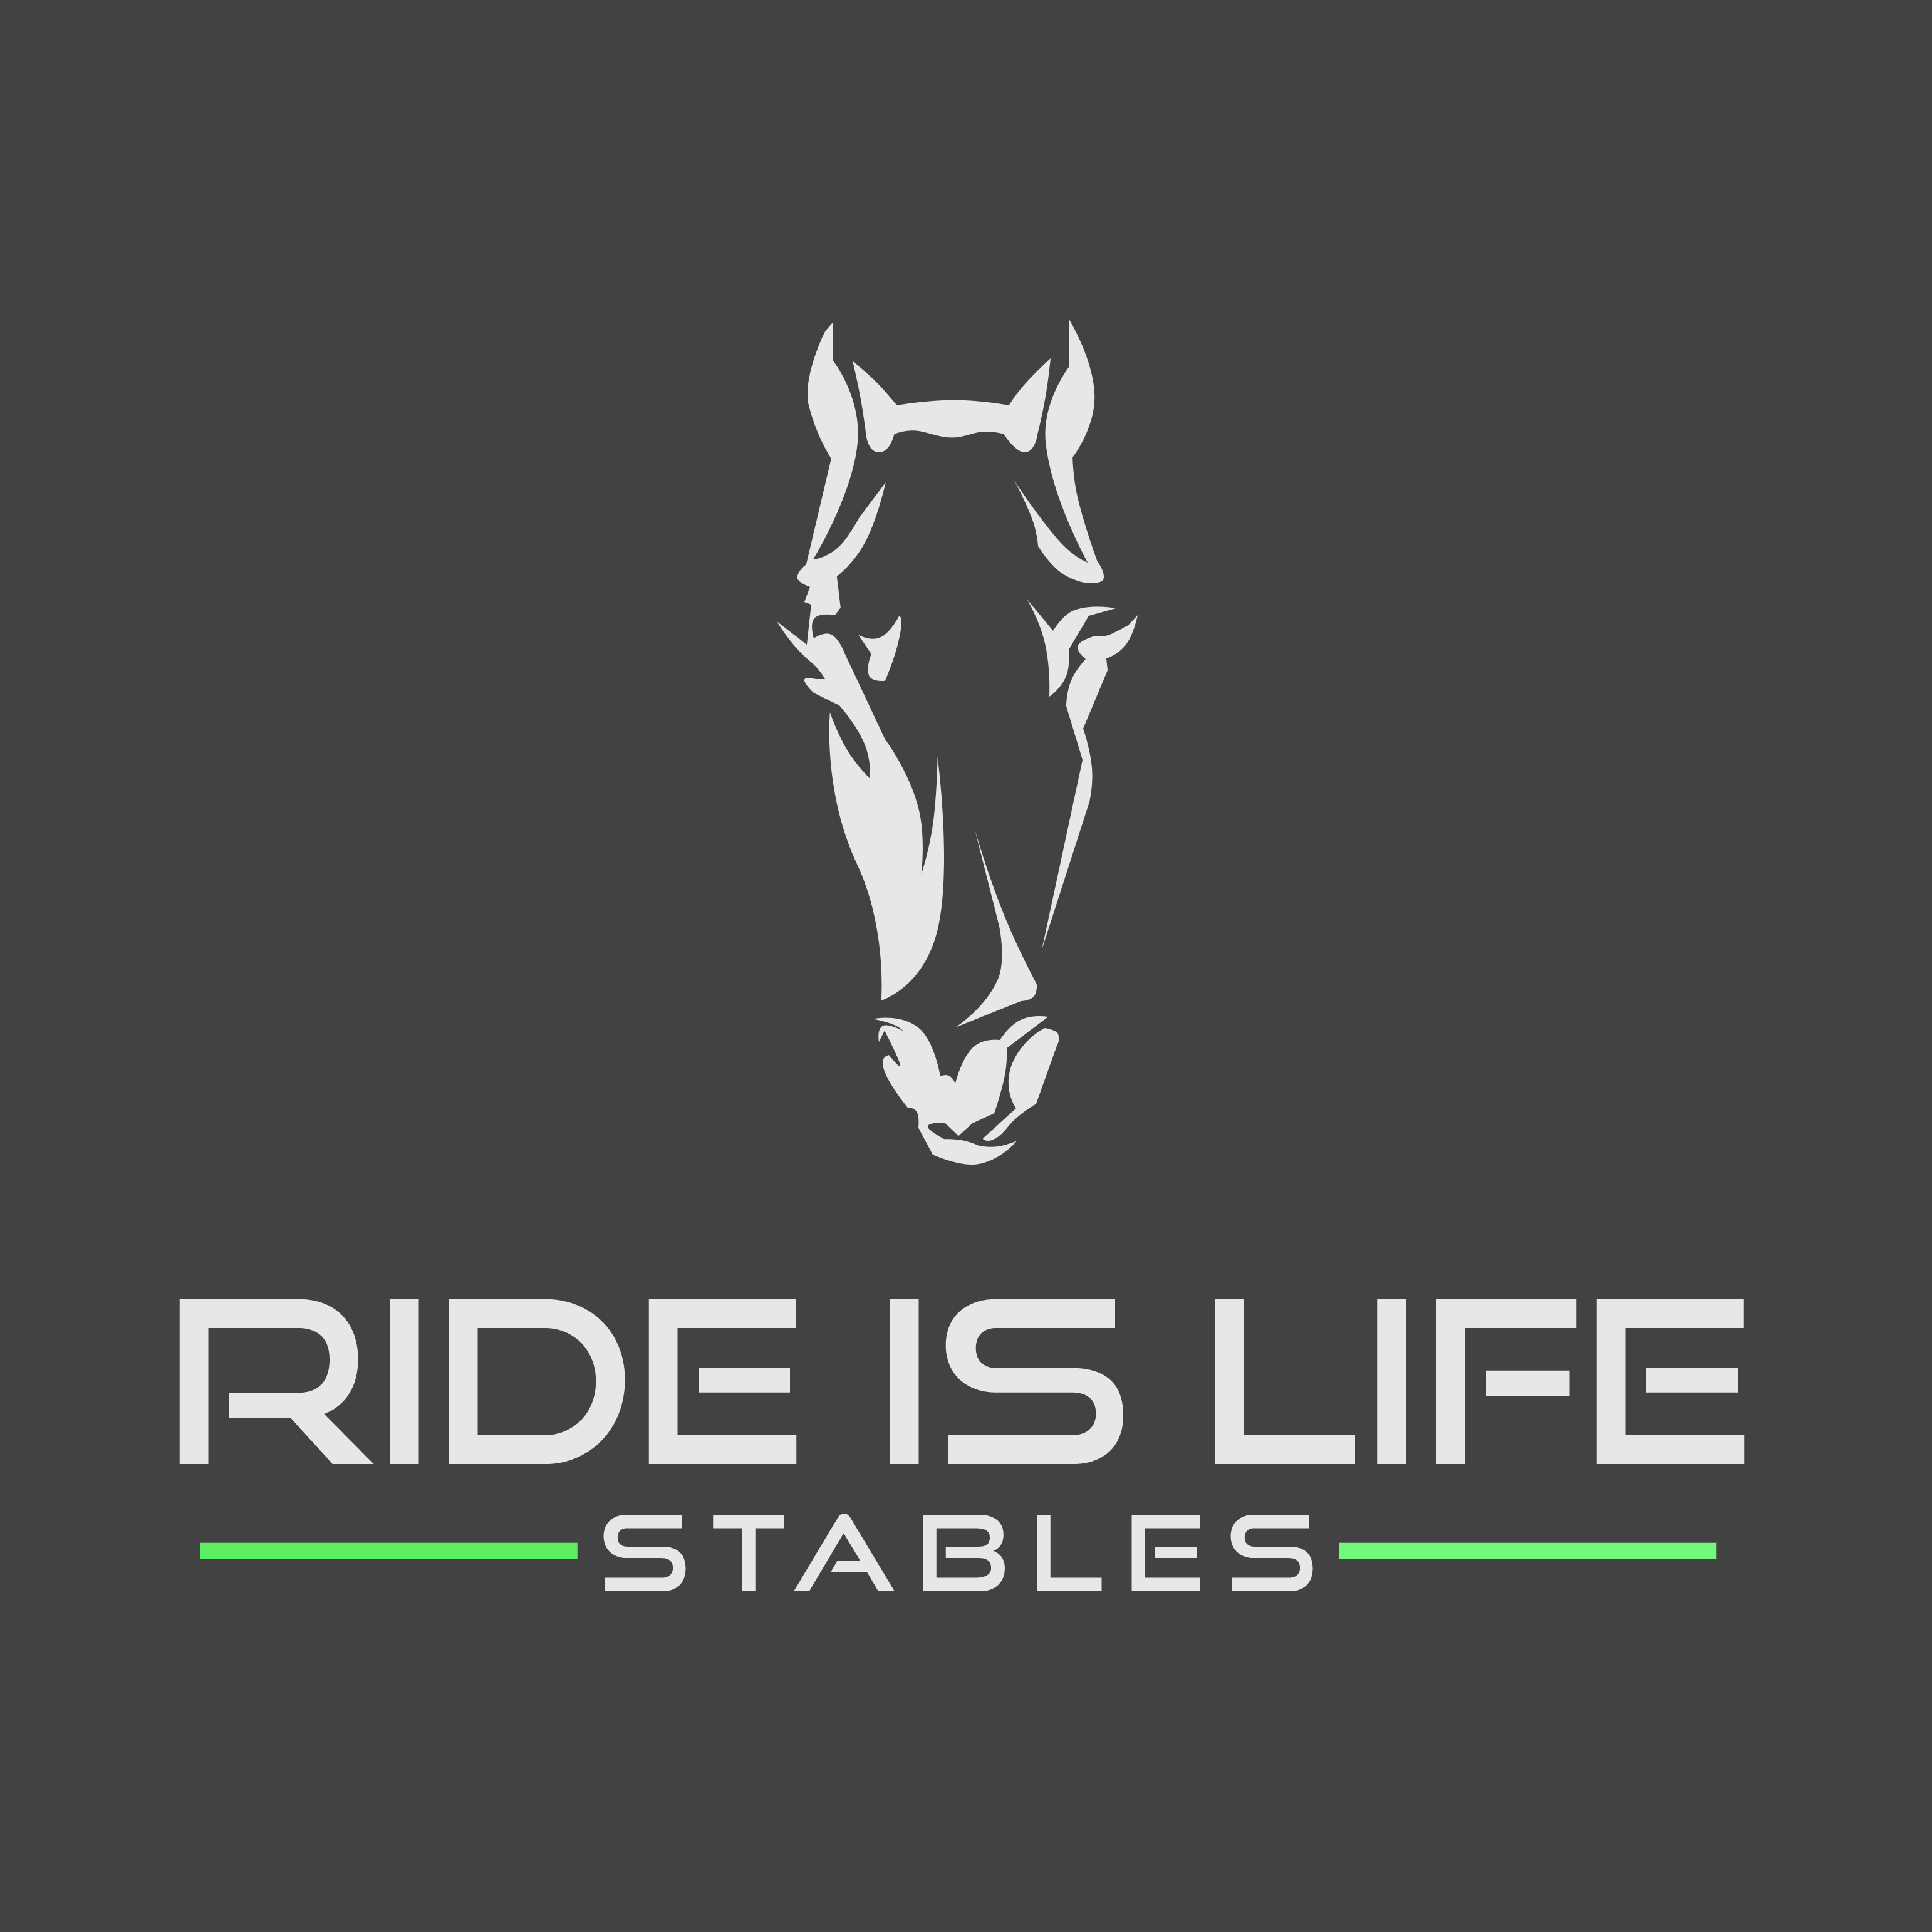 Ride Is Life stables